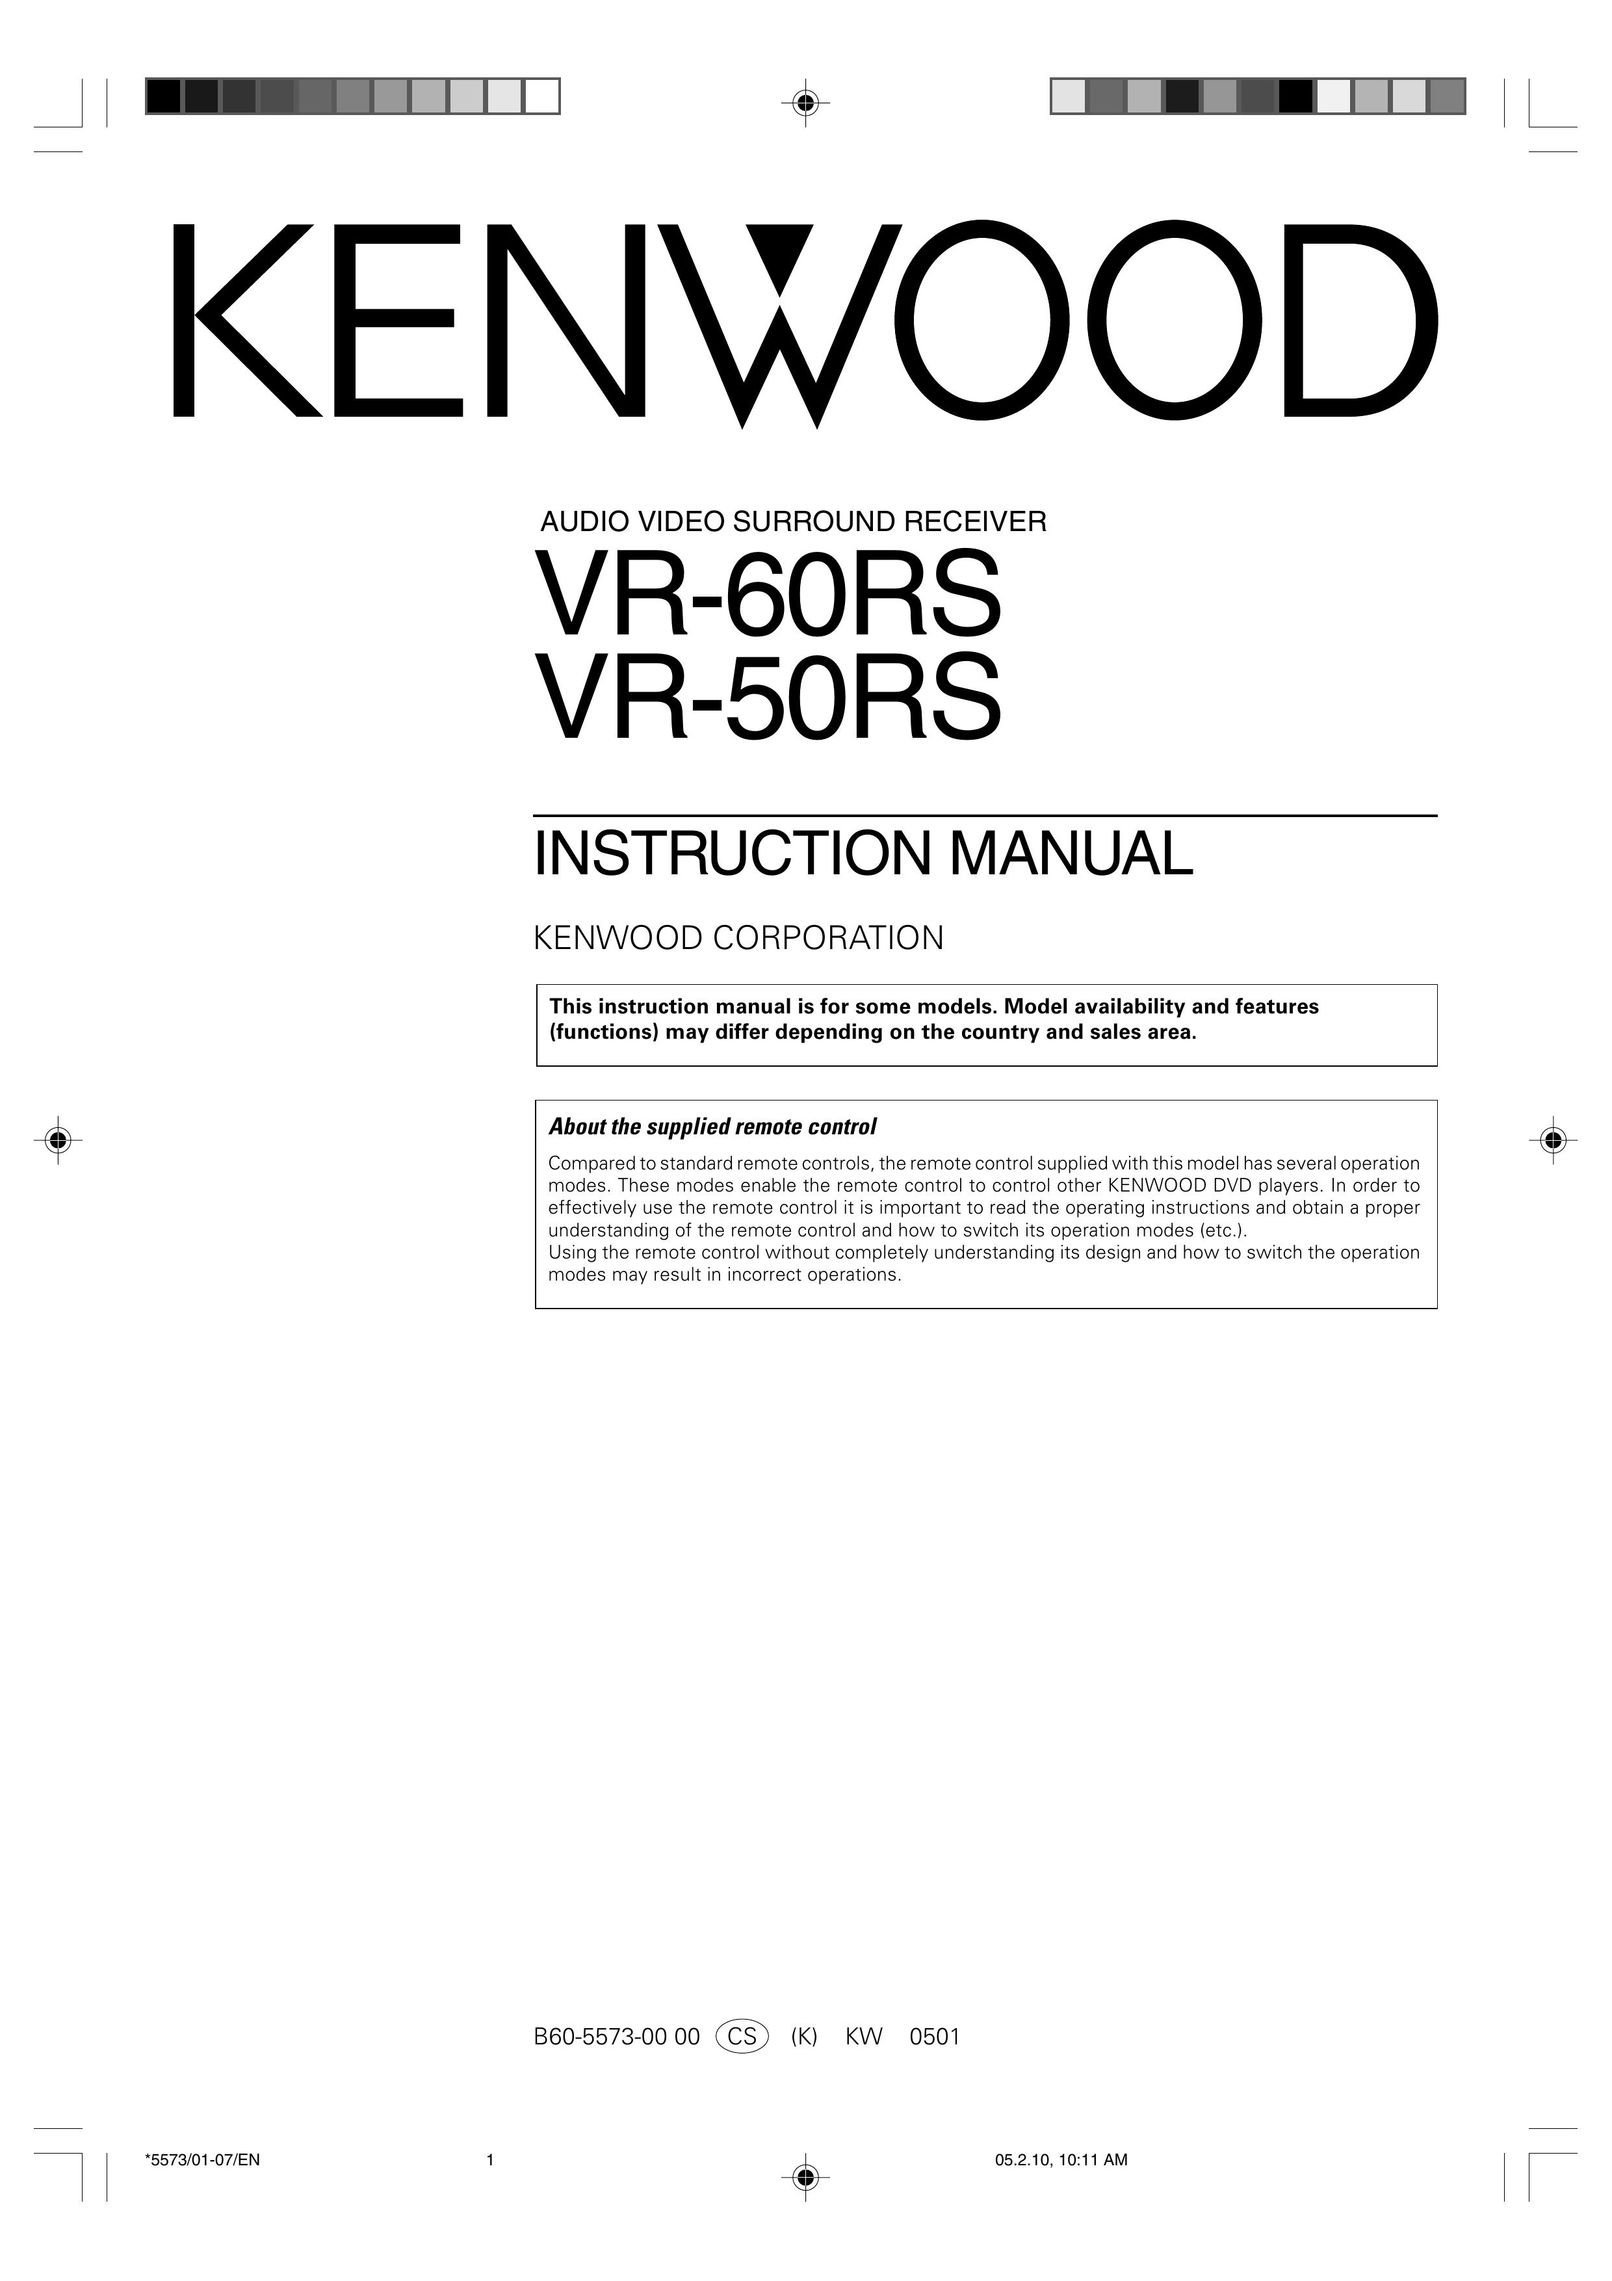 Kenwood VR-60RS Home Theater System User Manual